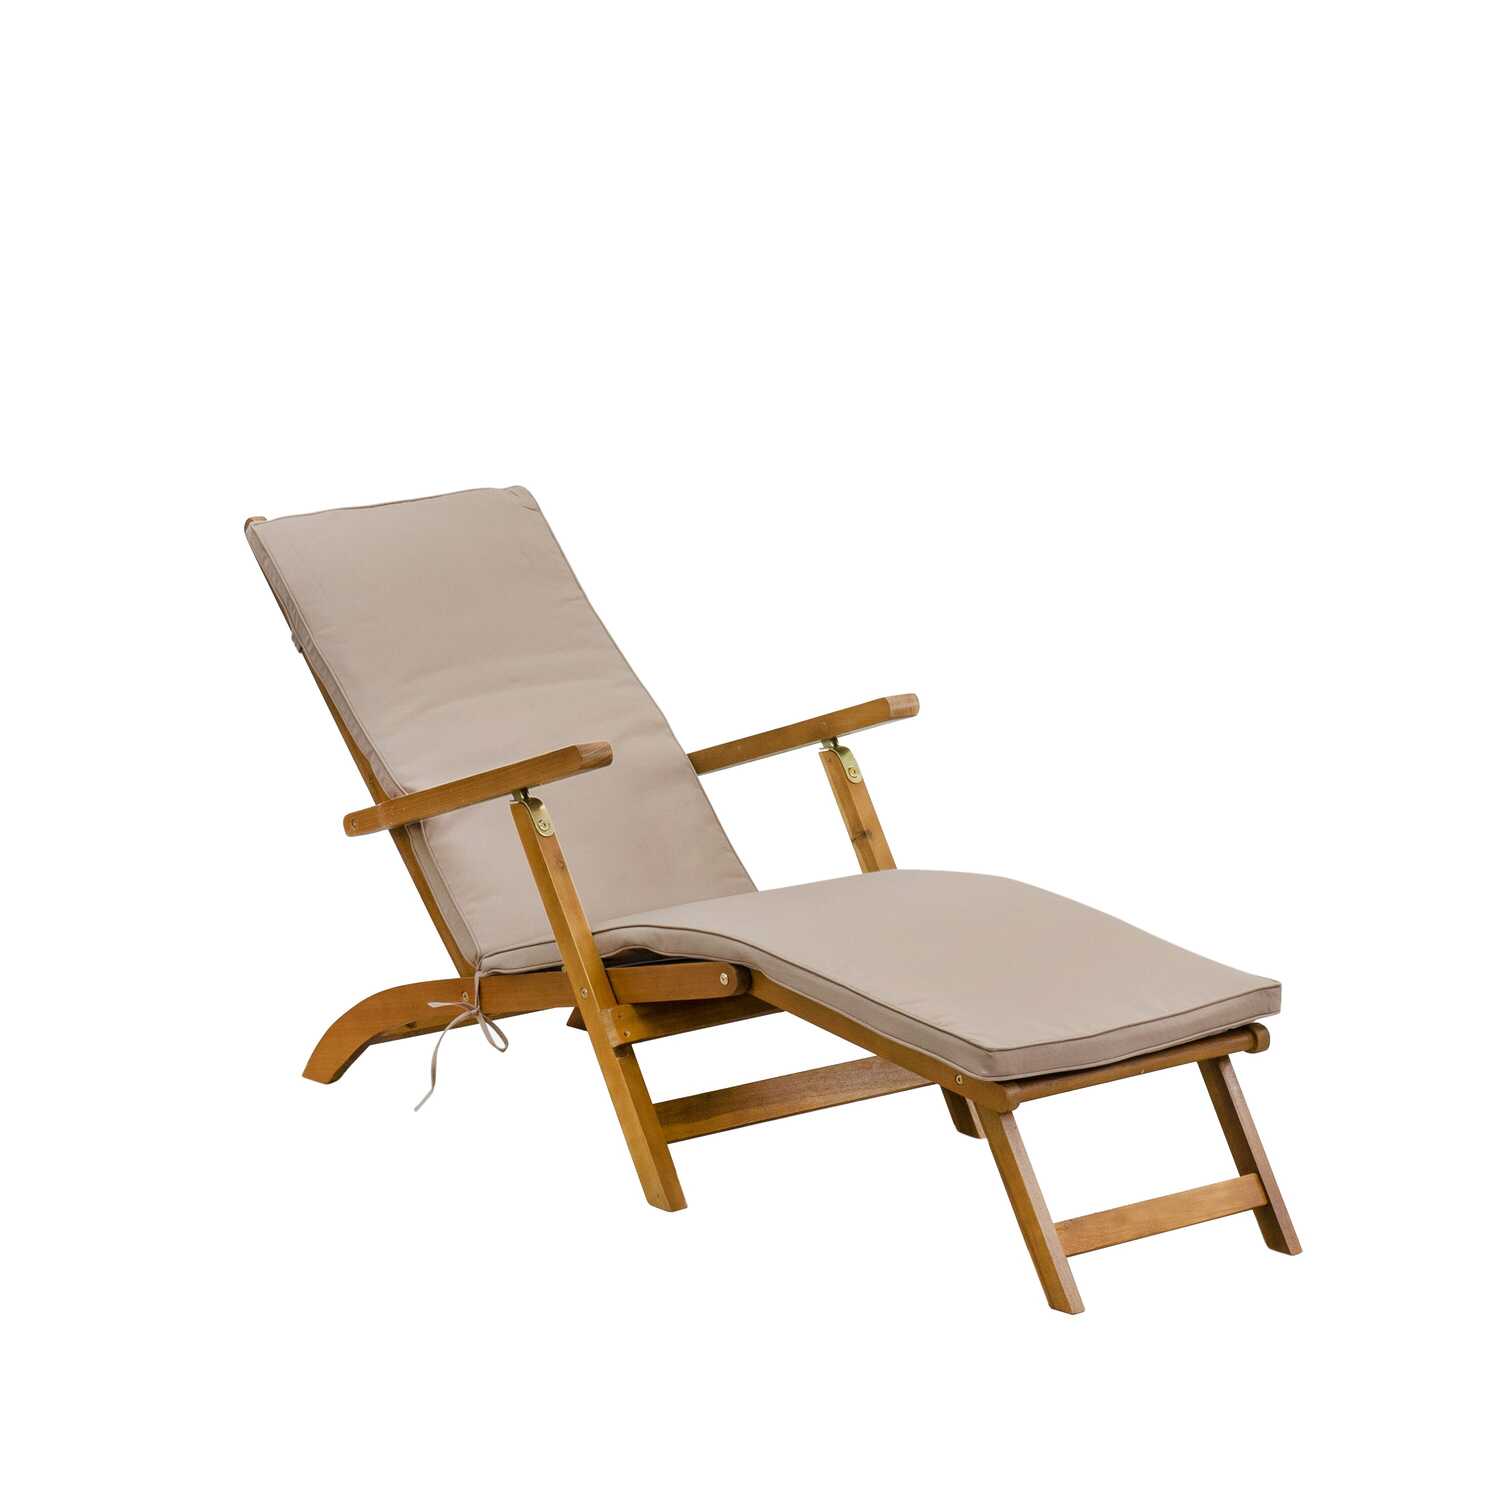 Outdoor Patio Garden Chairs - Salinas Deck Lounger Chairs - Natural Oil Finish - image 1 of 3